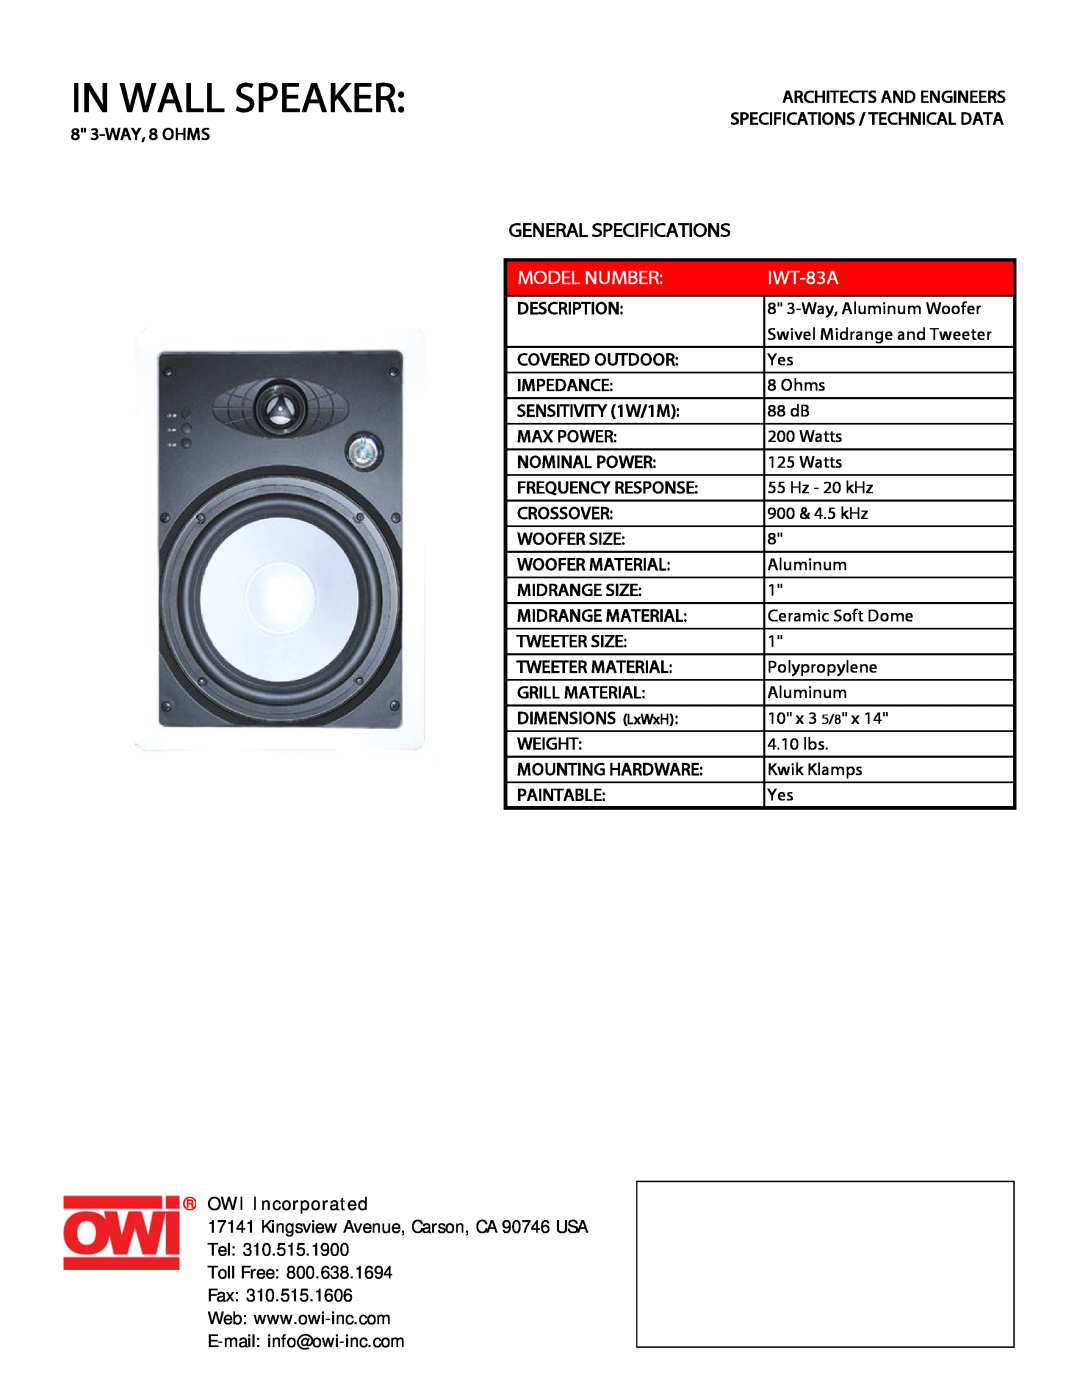 OWI IWT-83A specifications In Wall Speaker, General Specifications, Model Number, OWI Incorporated 